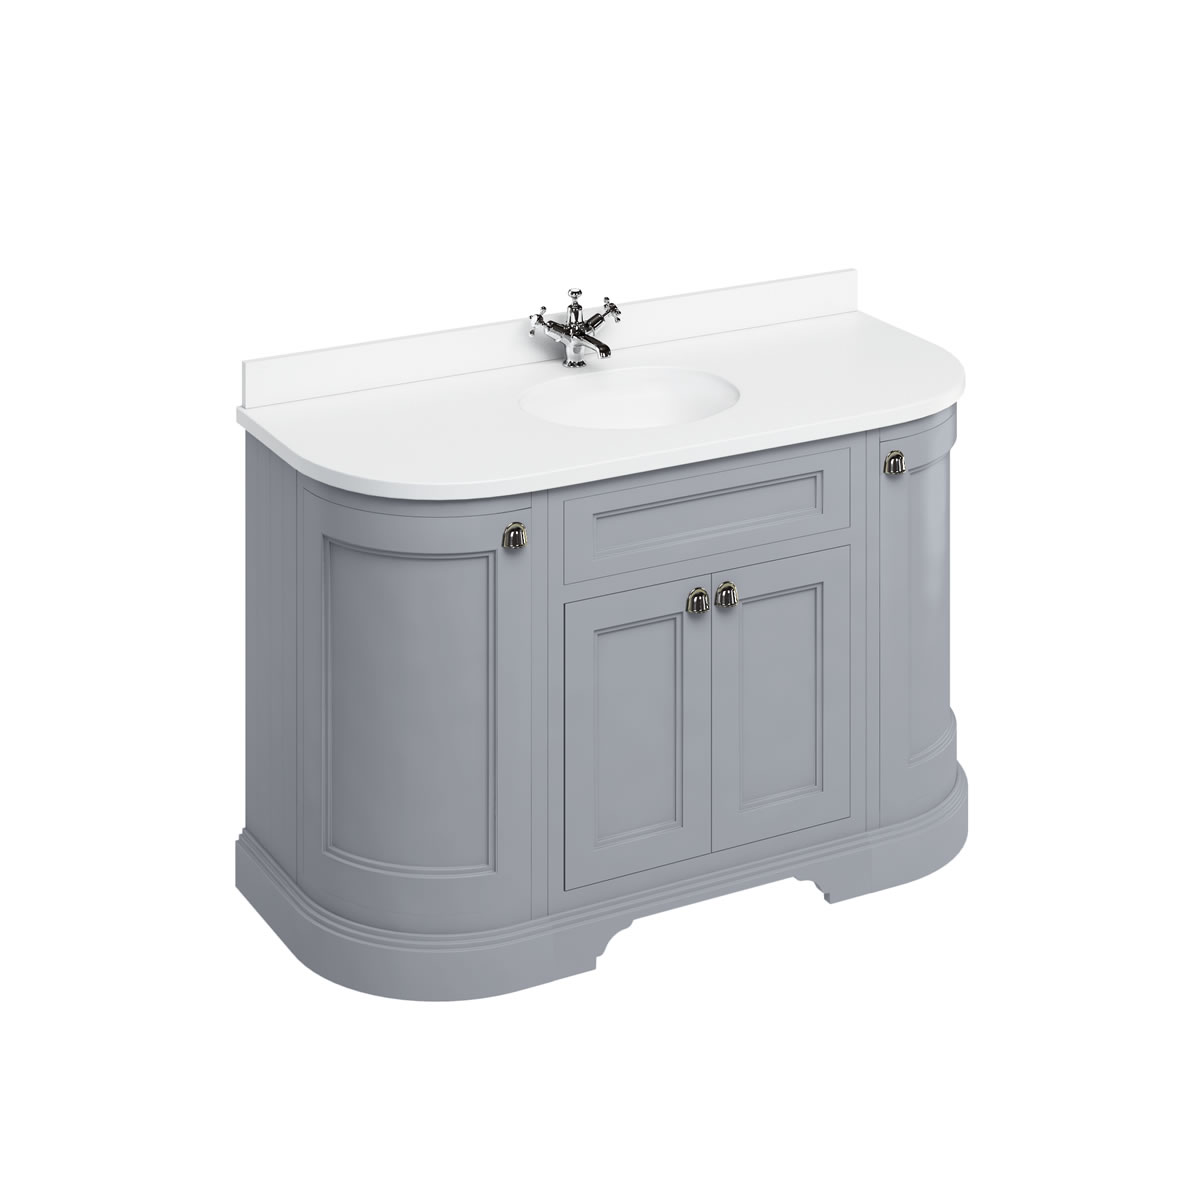 Freestanding 134 Curved Vanity Unit with doors - Classic Grey and Minerva white worktop with integrated white basin 